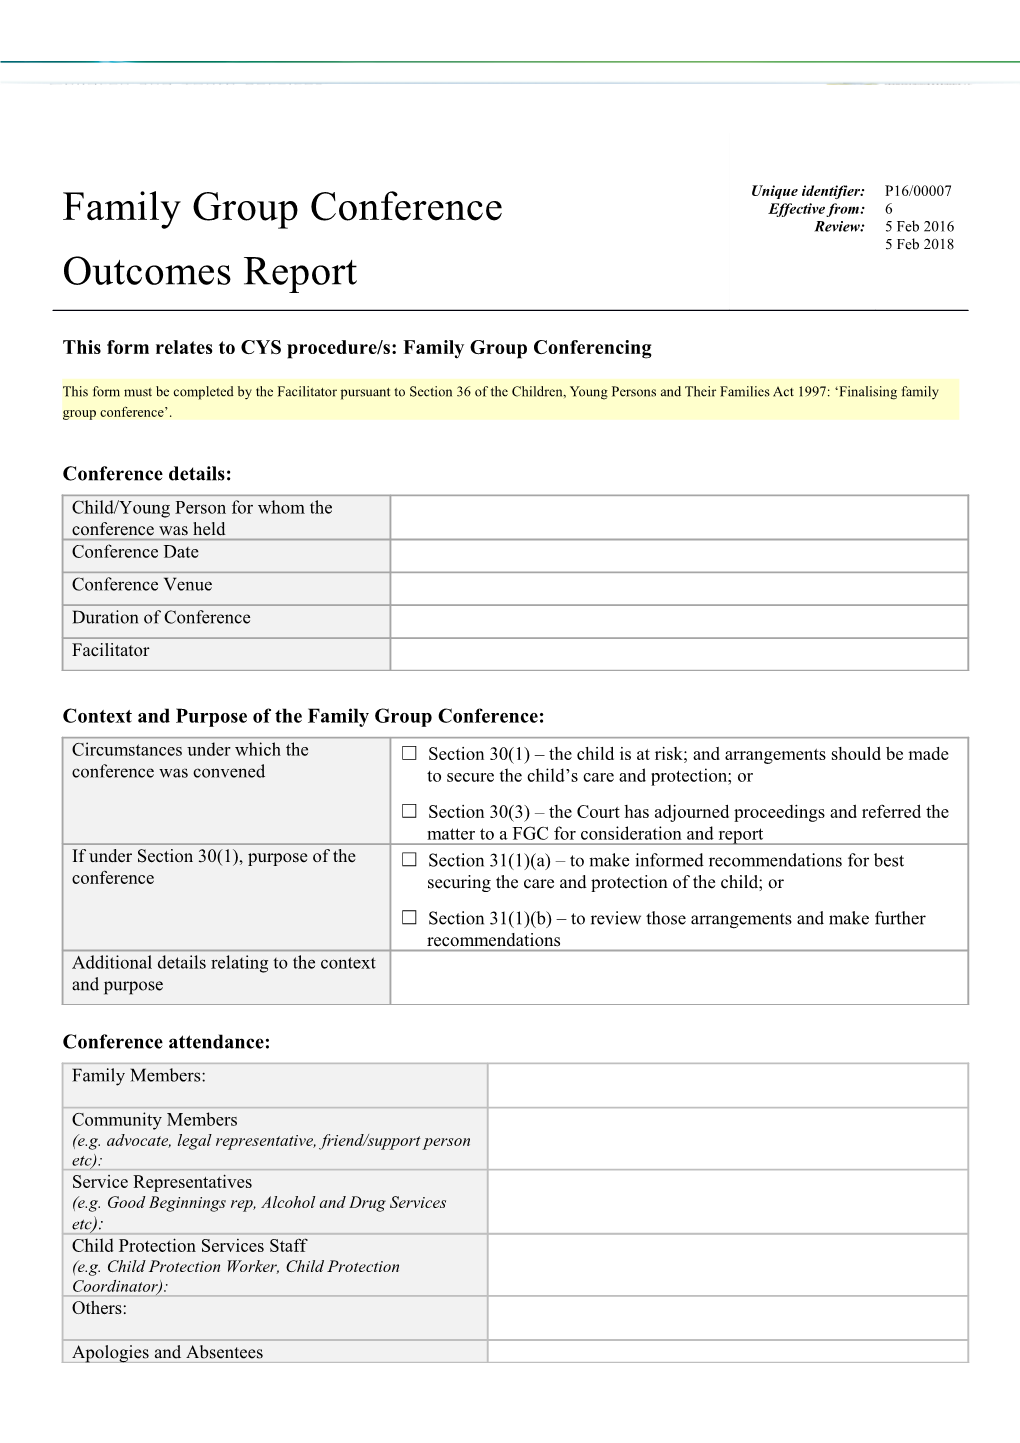 Family Group Conference Outcomes Report